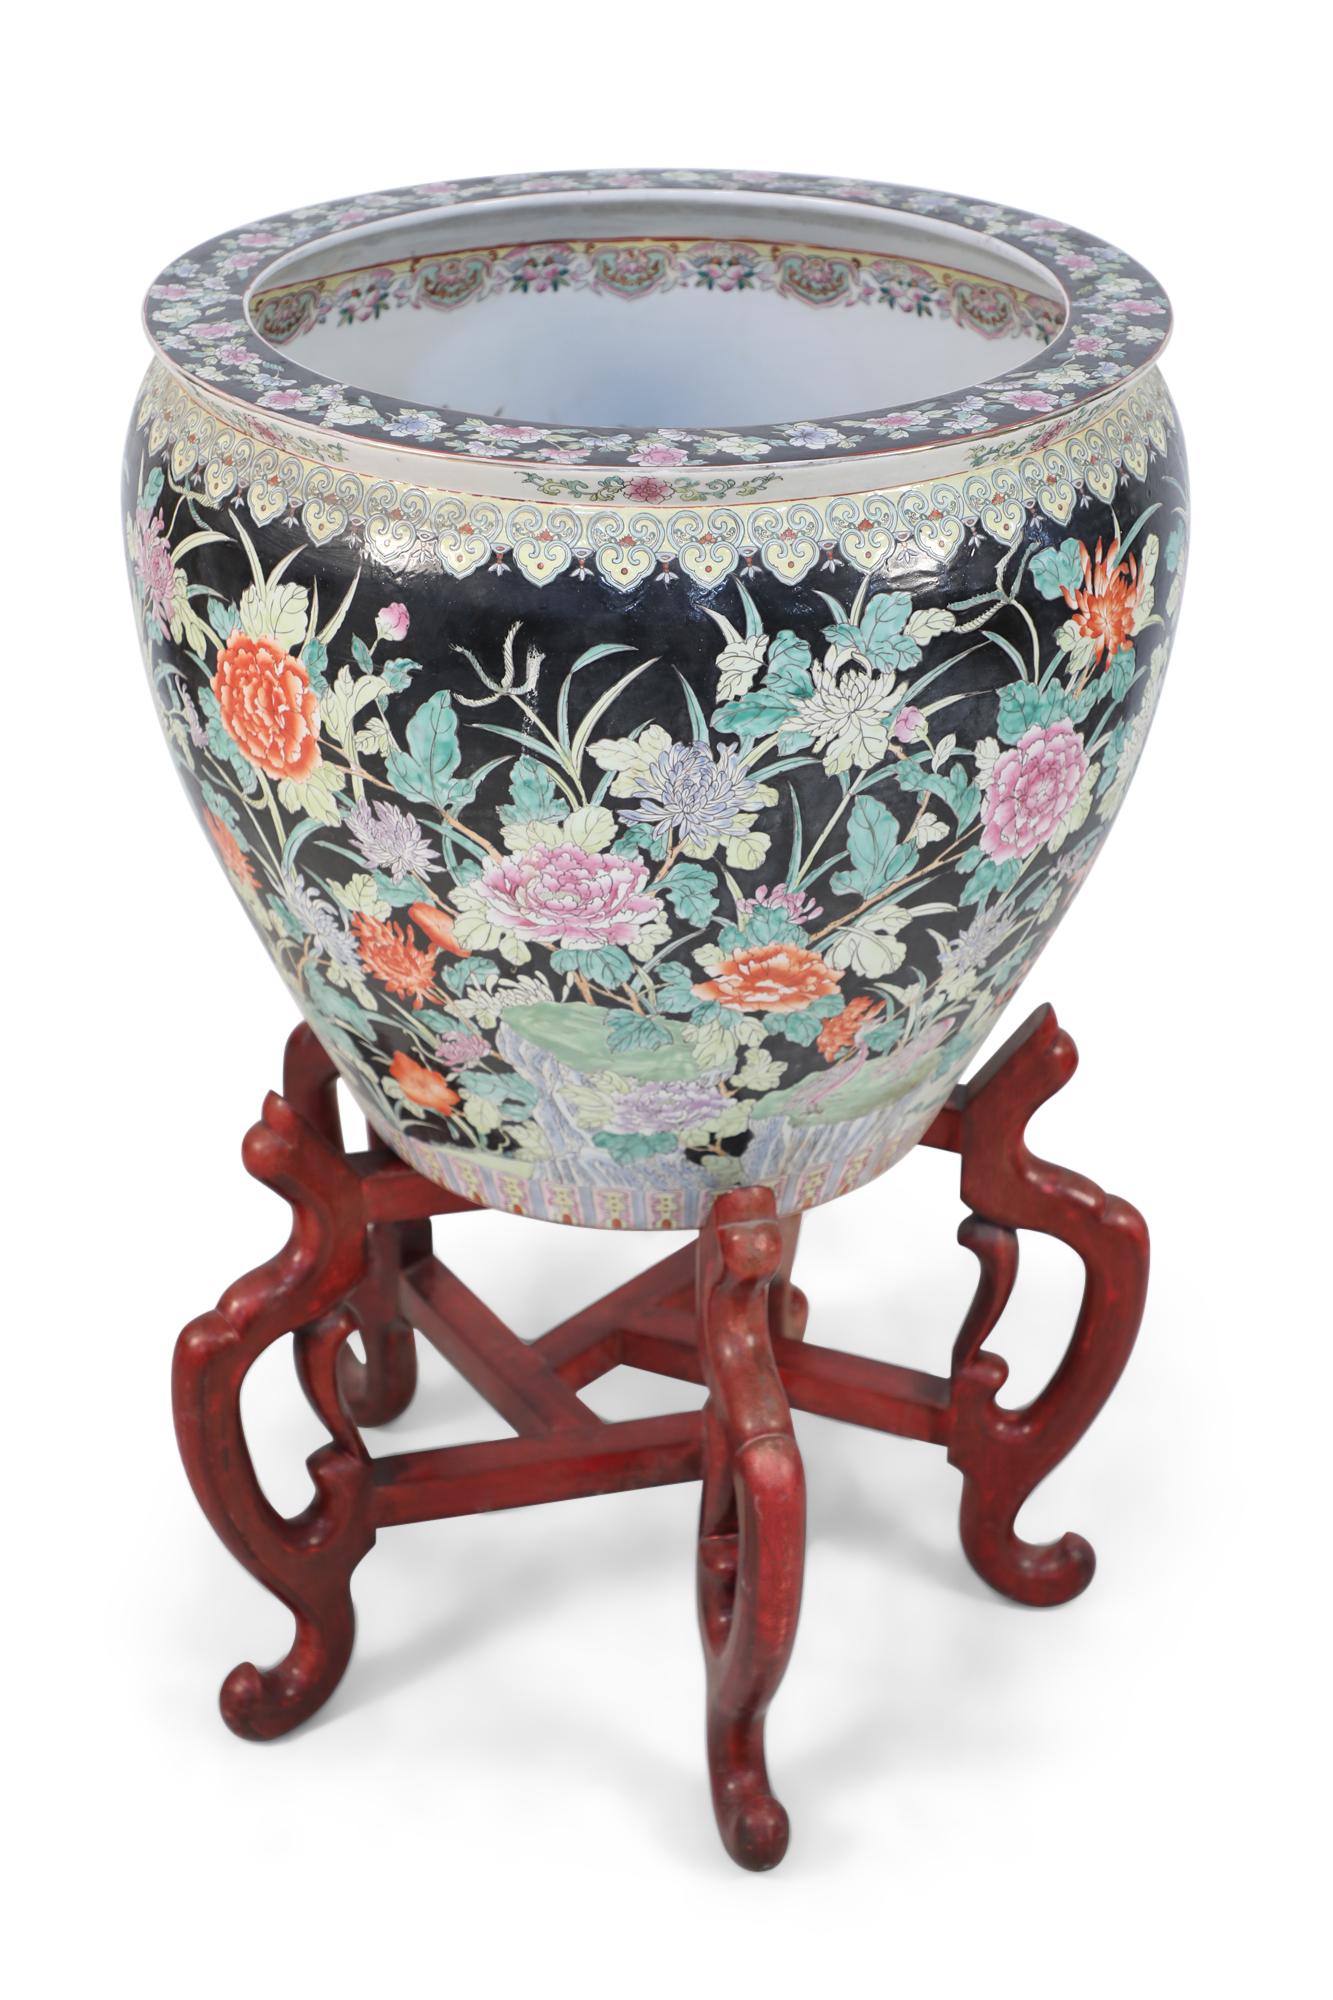 Chinese porcelain planter painted with florals and greenery over a black ground on the exterior and fish amidst seaweed along the interior. The pot sits atop a 5-footed wooden stand connected by stretchers.